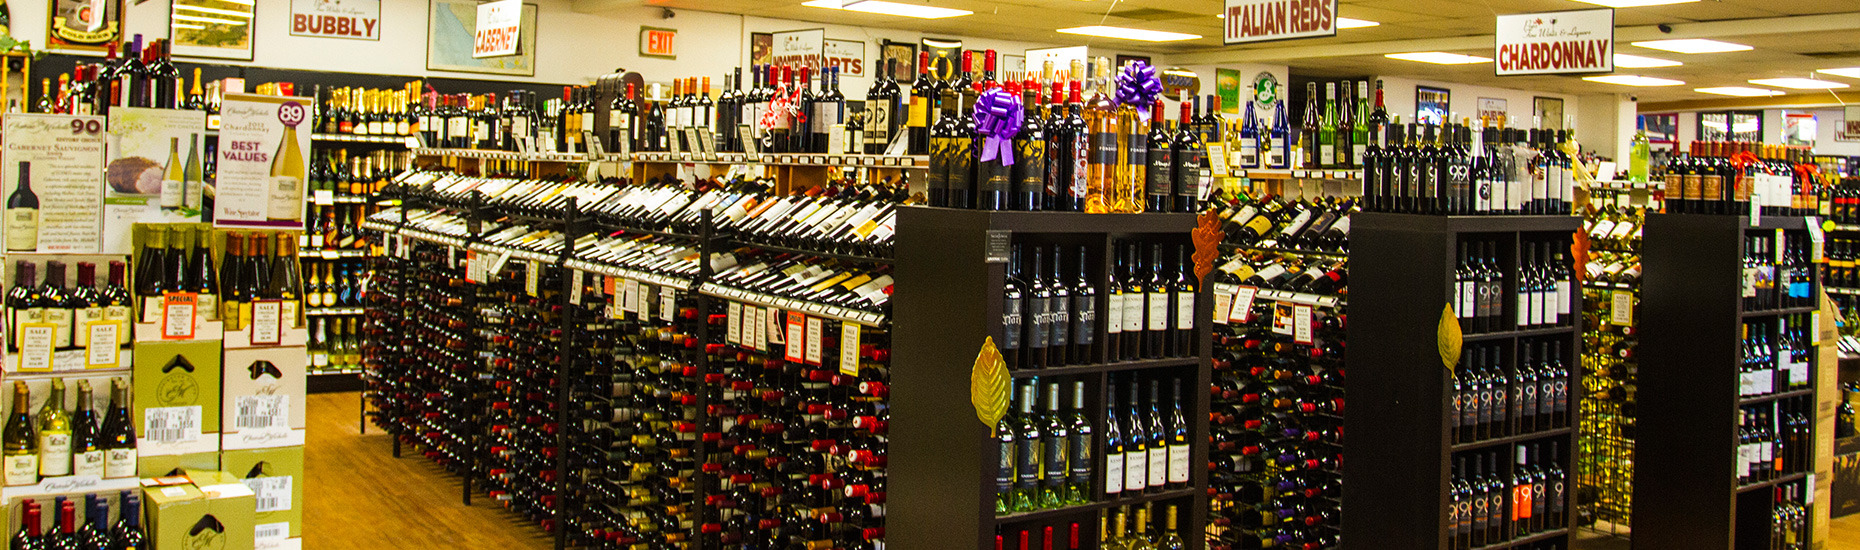 pops wines and spirits